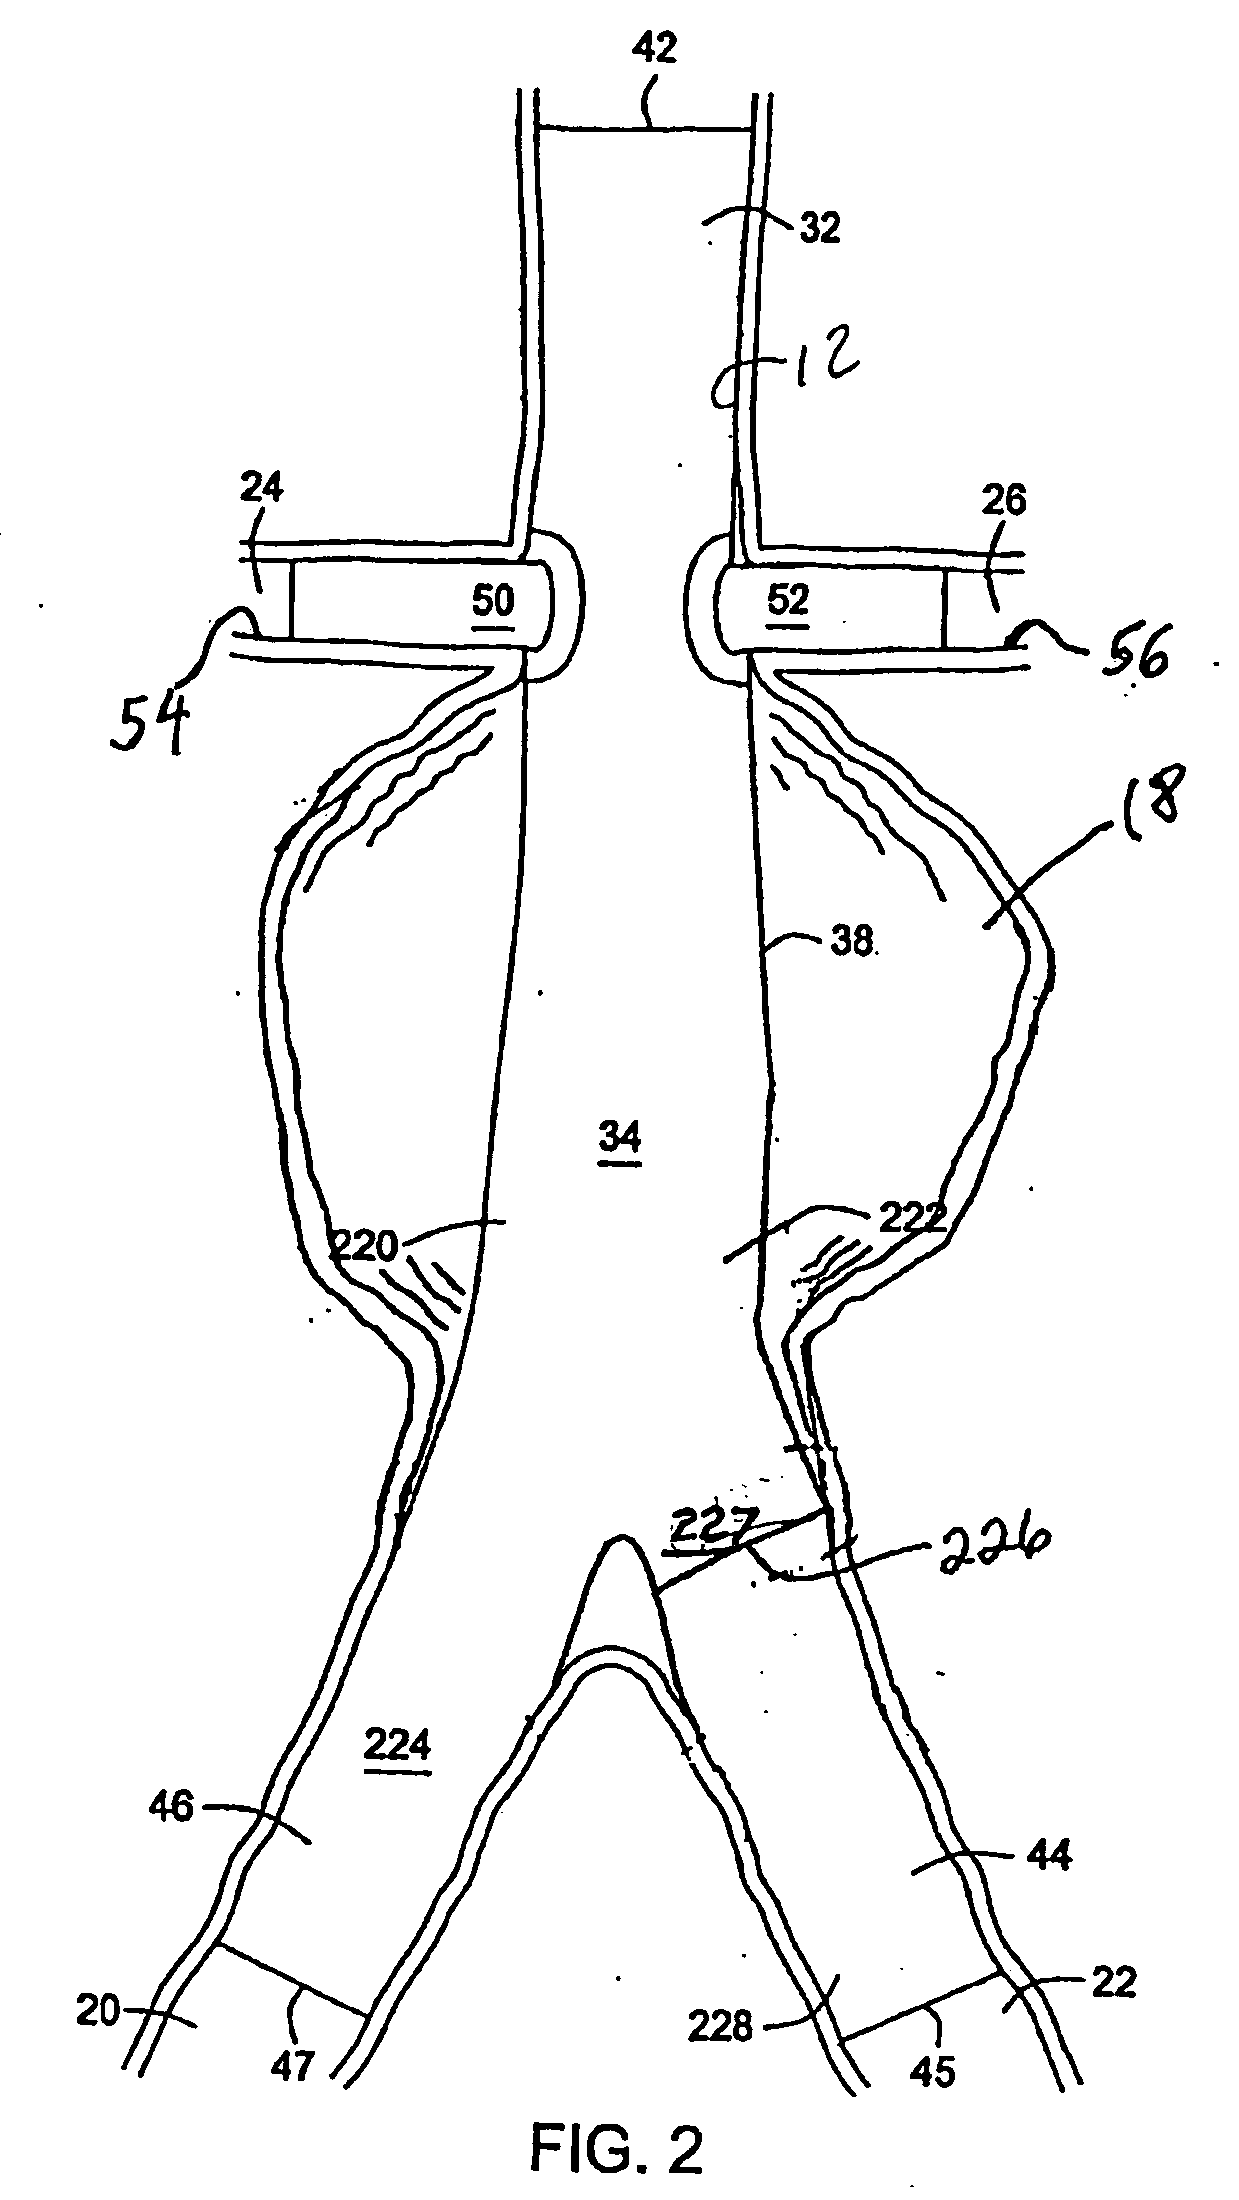 Methods and apparatus for treatment of aneurysms adjacent branch arteries including branch artery flow lumen alignment